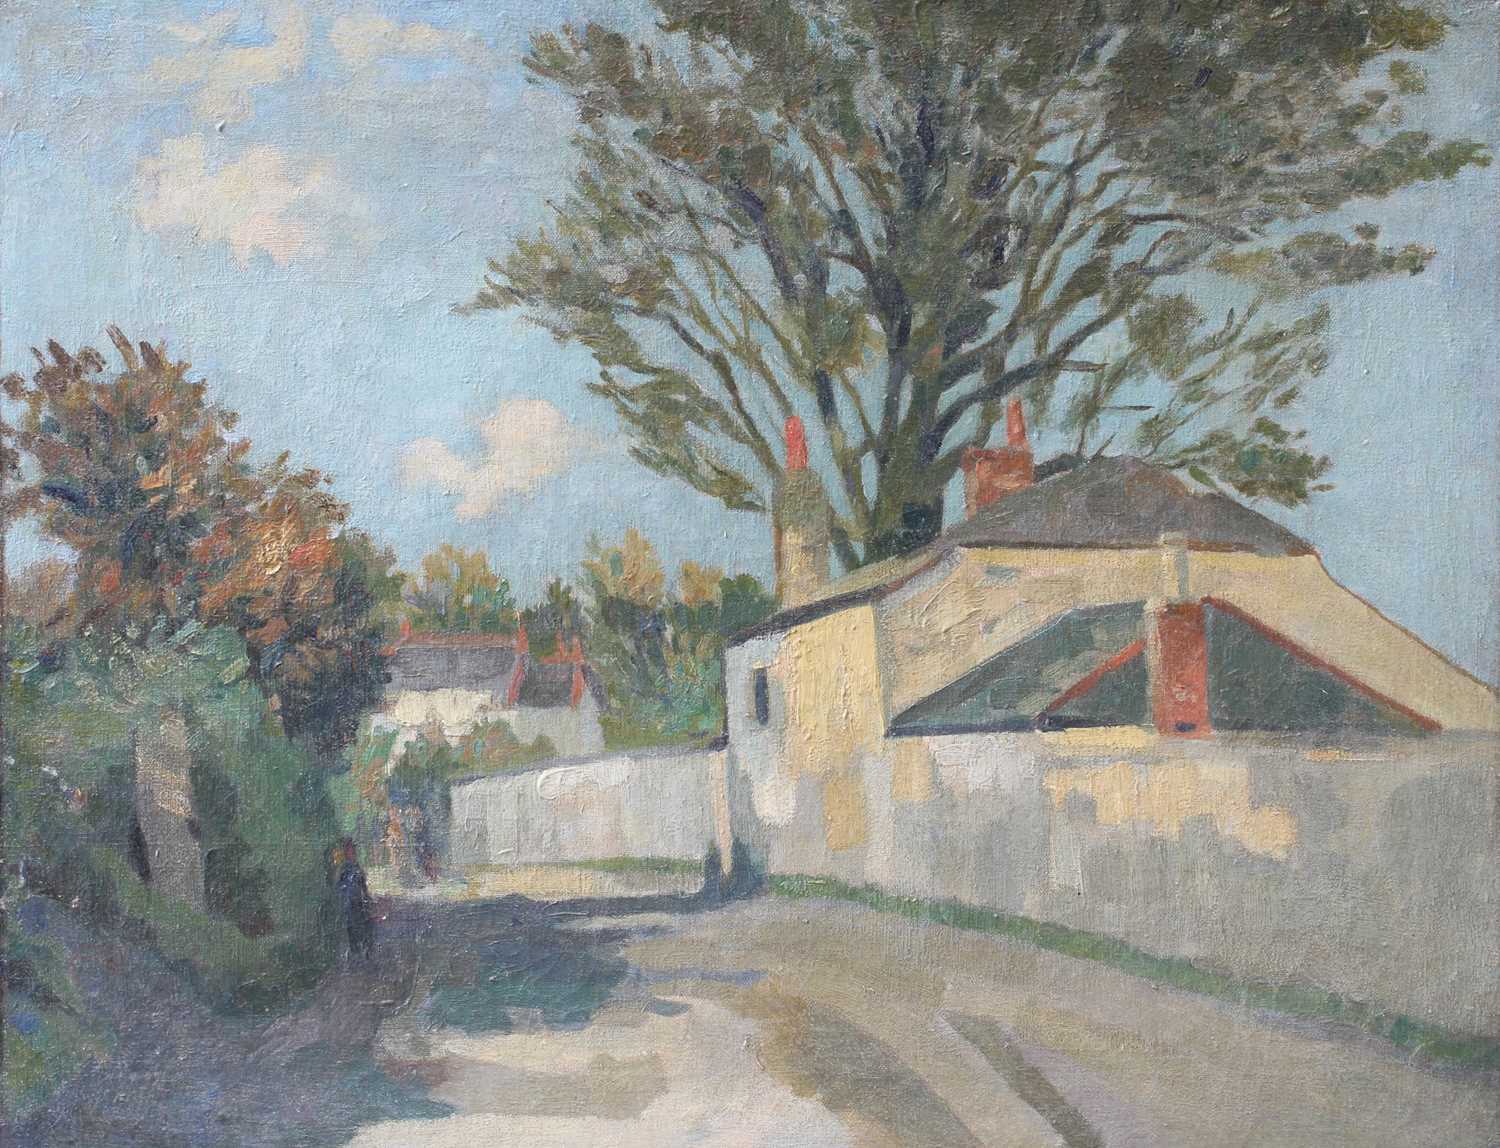 Manner of Robert Langley Hutton (1883-1919) Sun-dappled houses and a figure on a country road Oil on